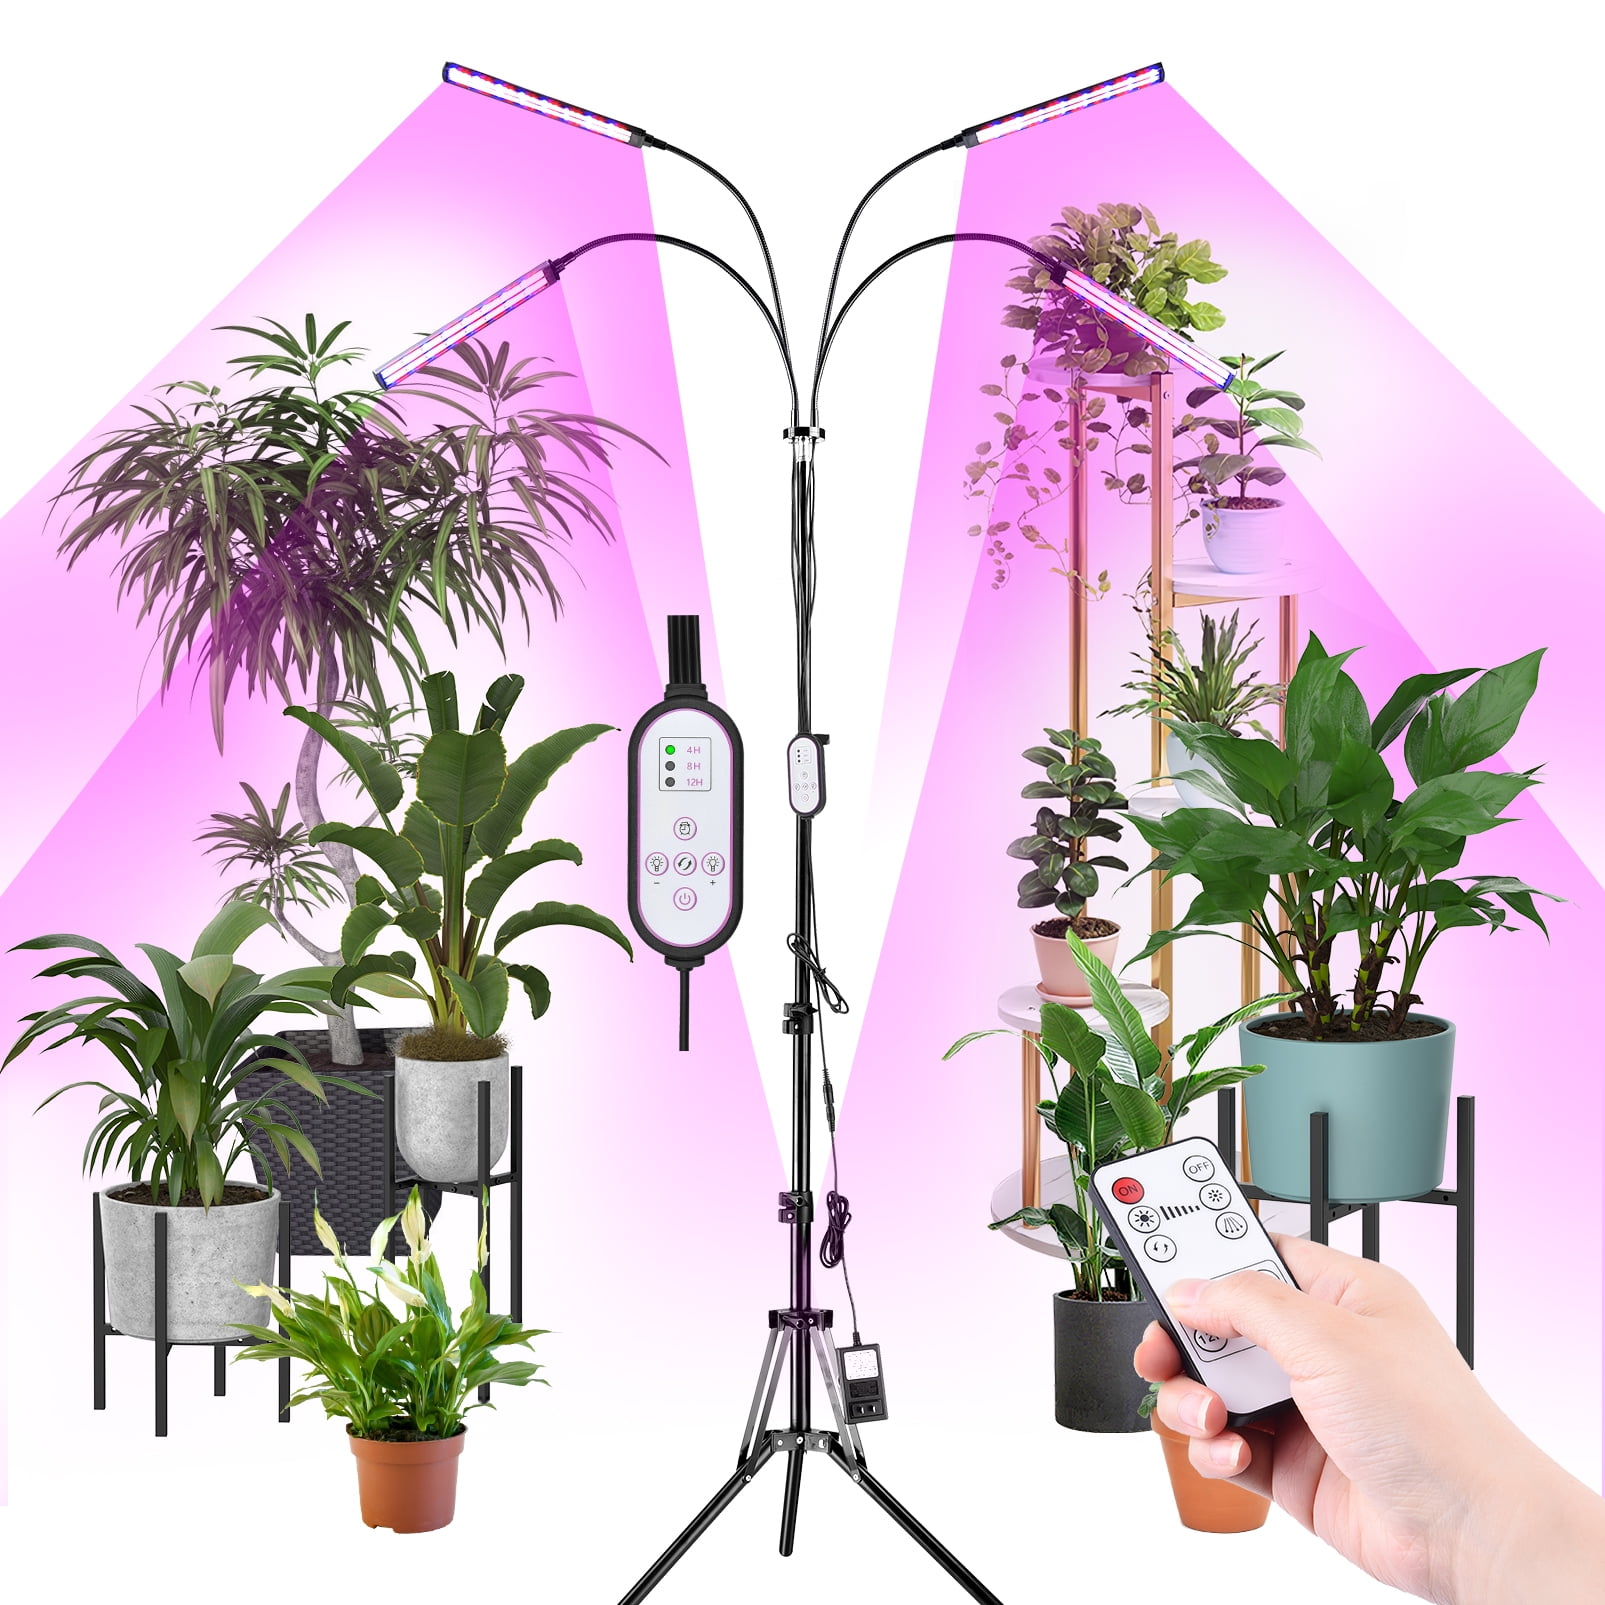 LED Grow Light for Indoor Plants Growing Lamp 150w 289 LEDs Dimmable Plant Bulb for sale online 